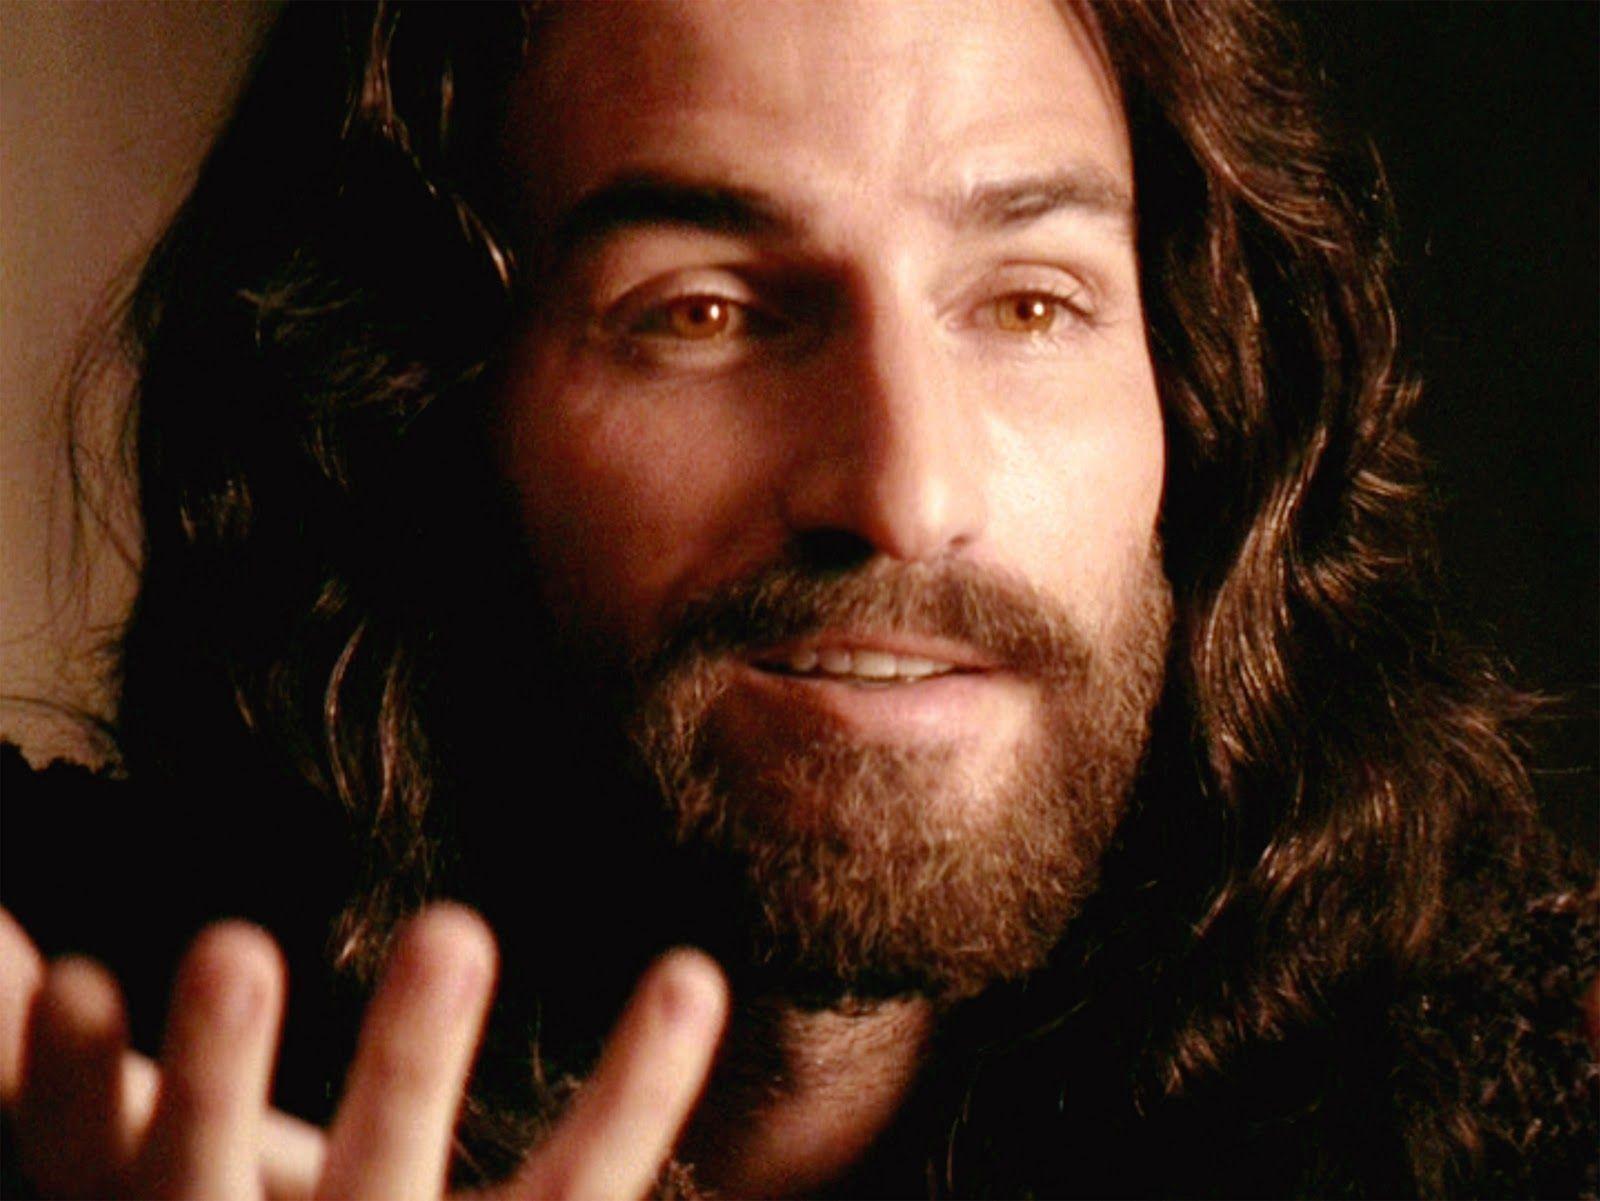 best image about Movie: The Passion of the Christ +++